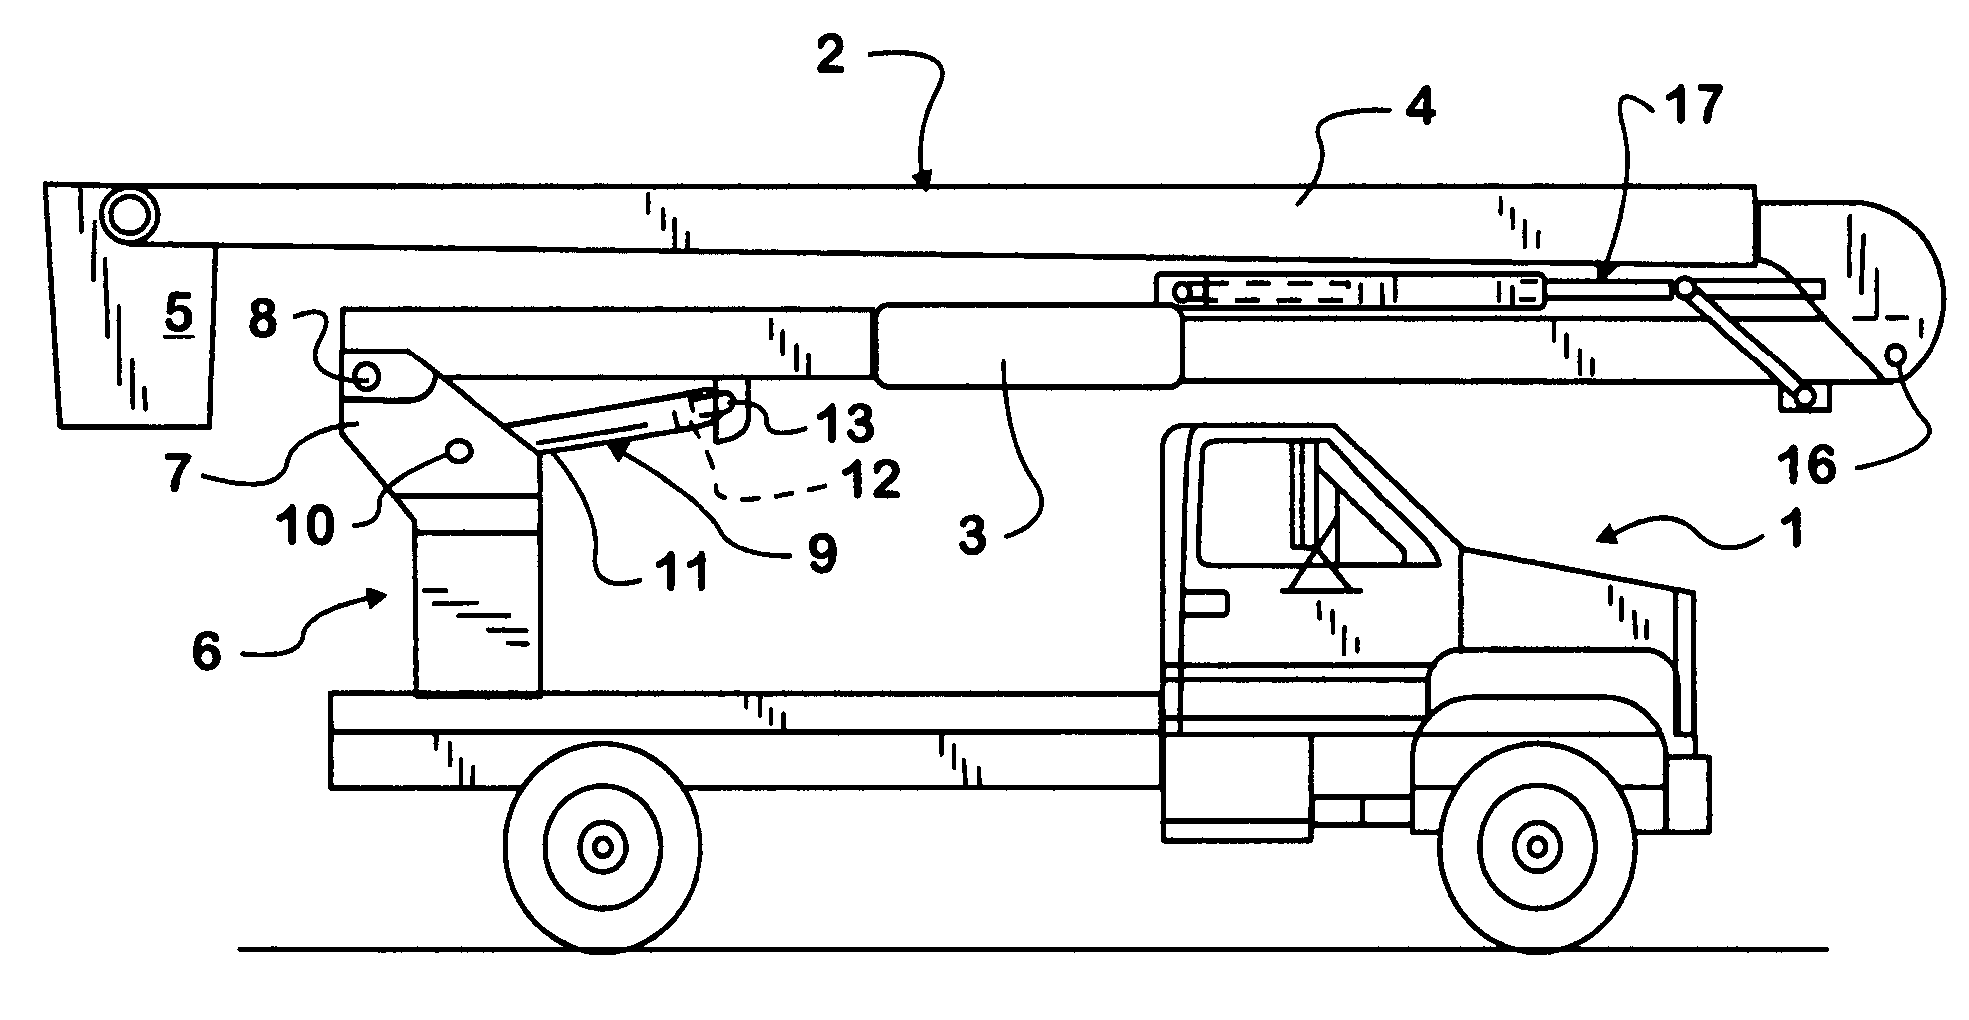 System for integrating body equipment with a vehicle hybrid powertrain